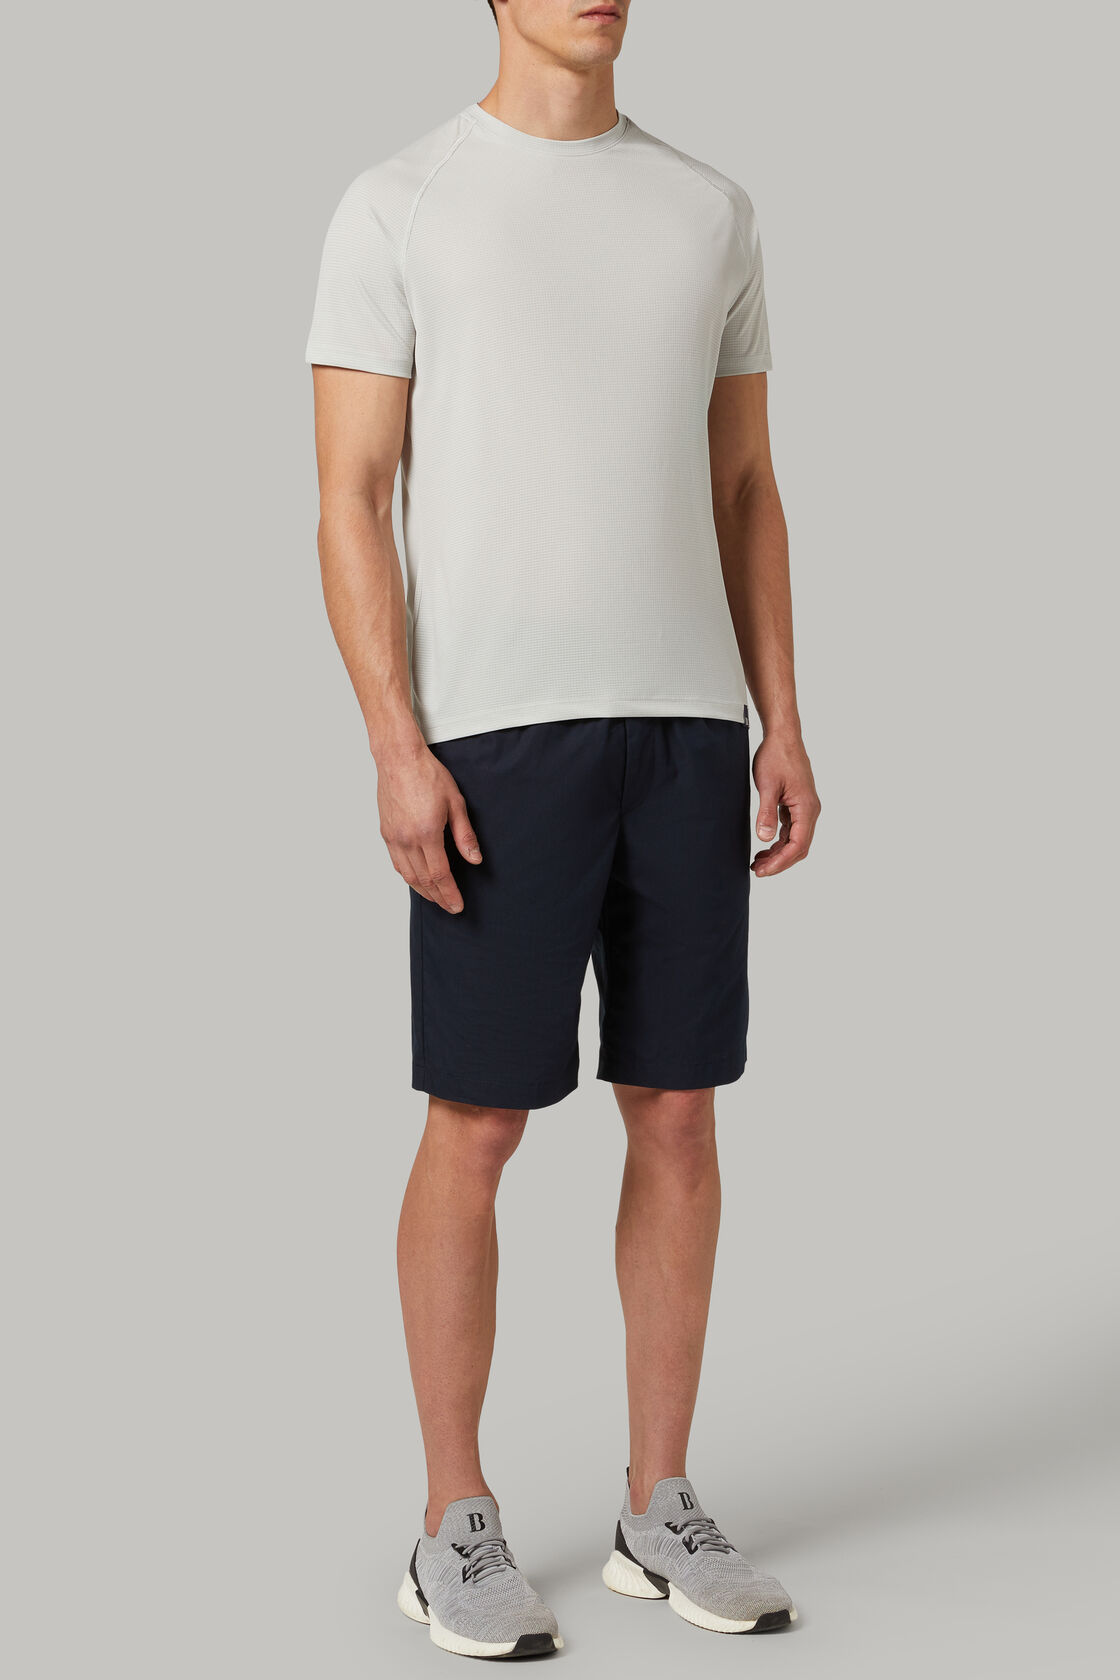 T-shirt in sustainable technical jersey, Ice, hi-res